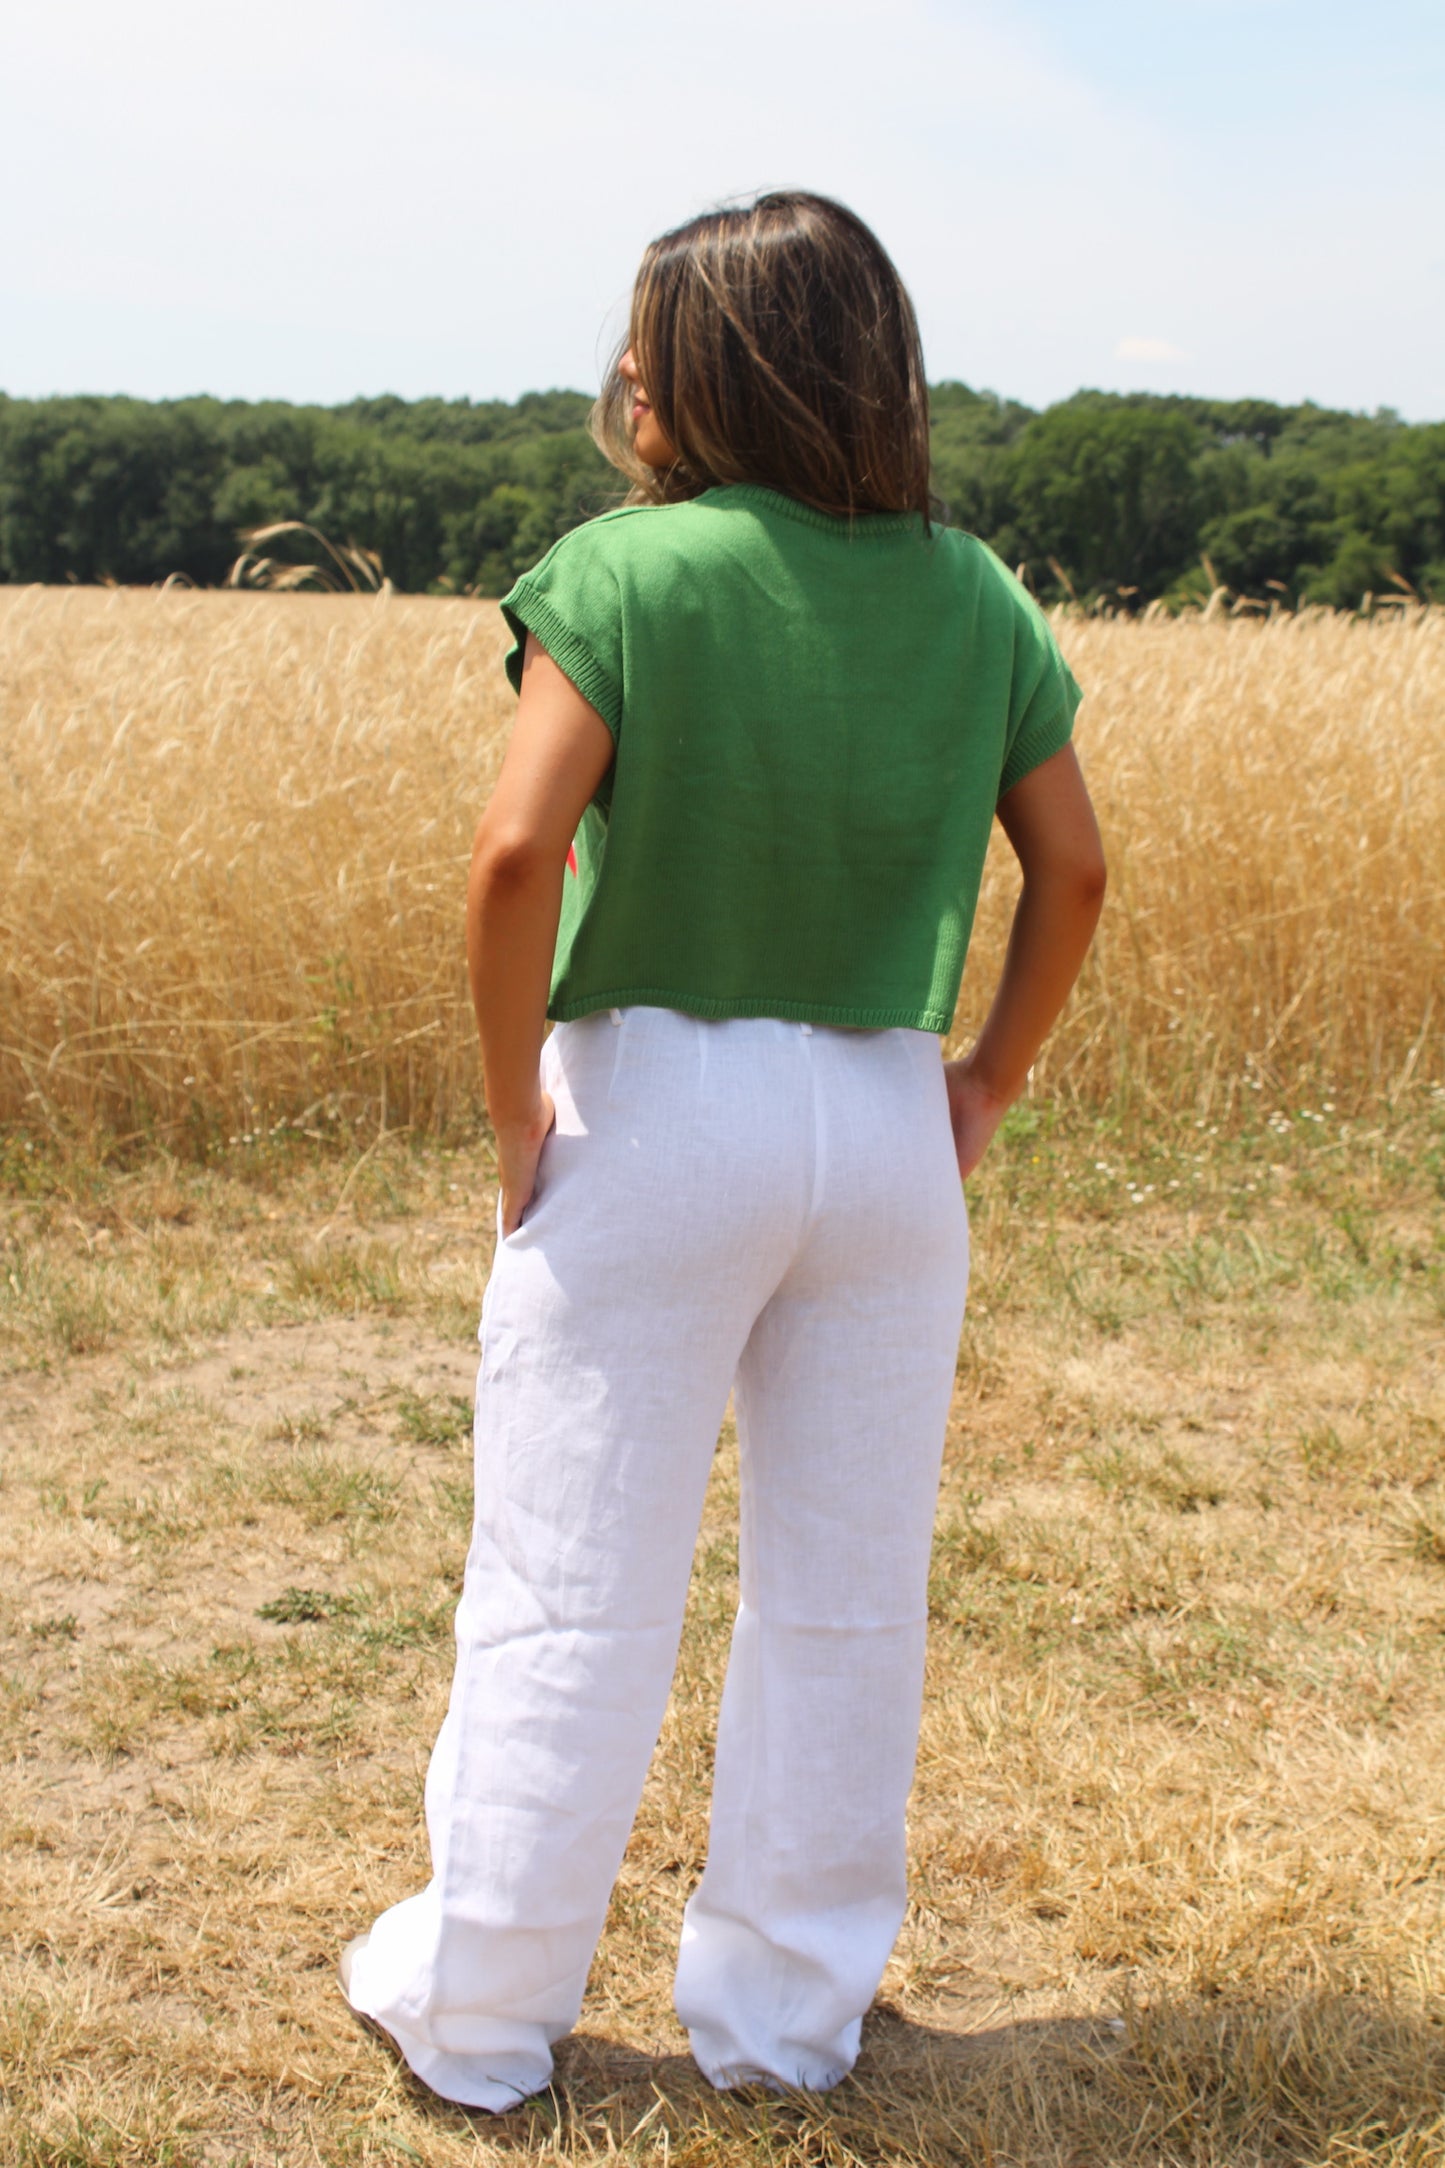 The HB Beach House Trousers